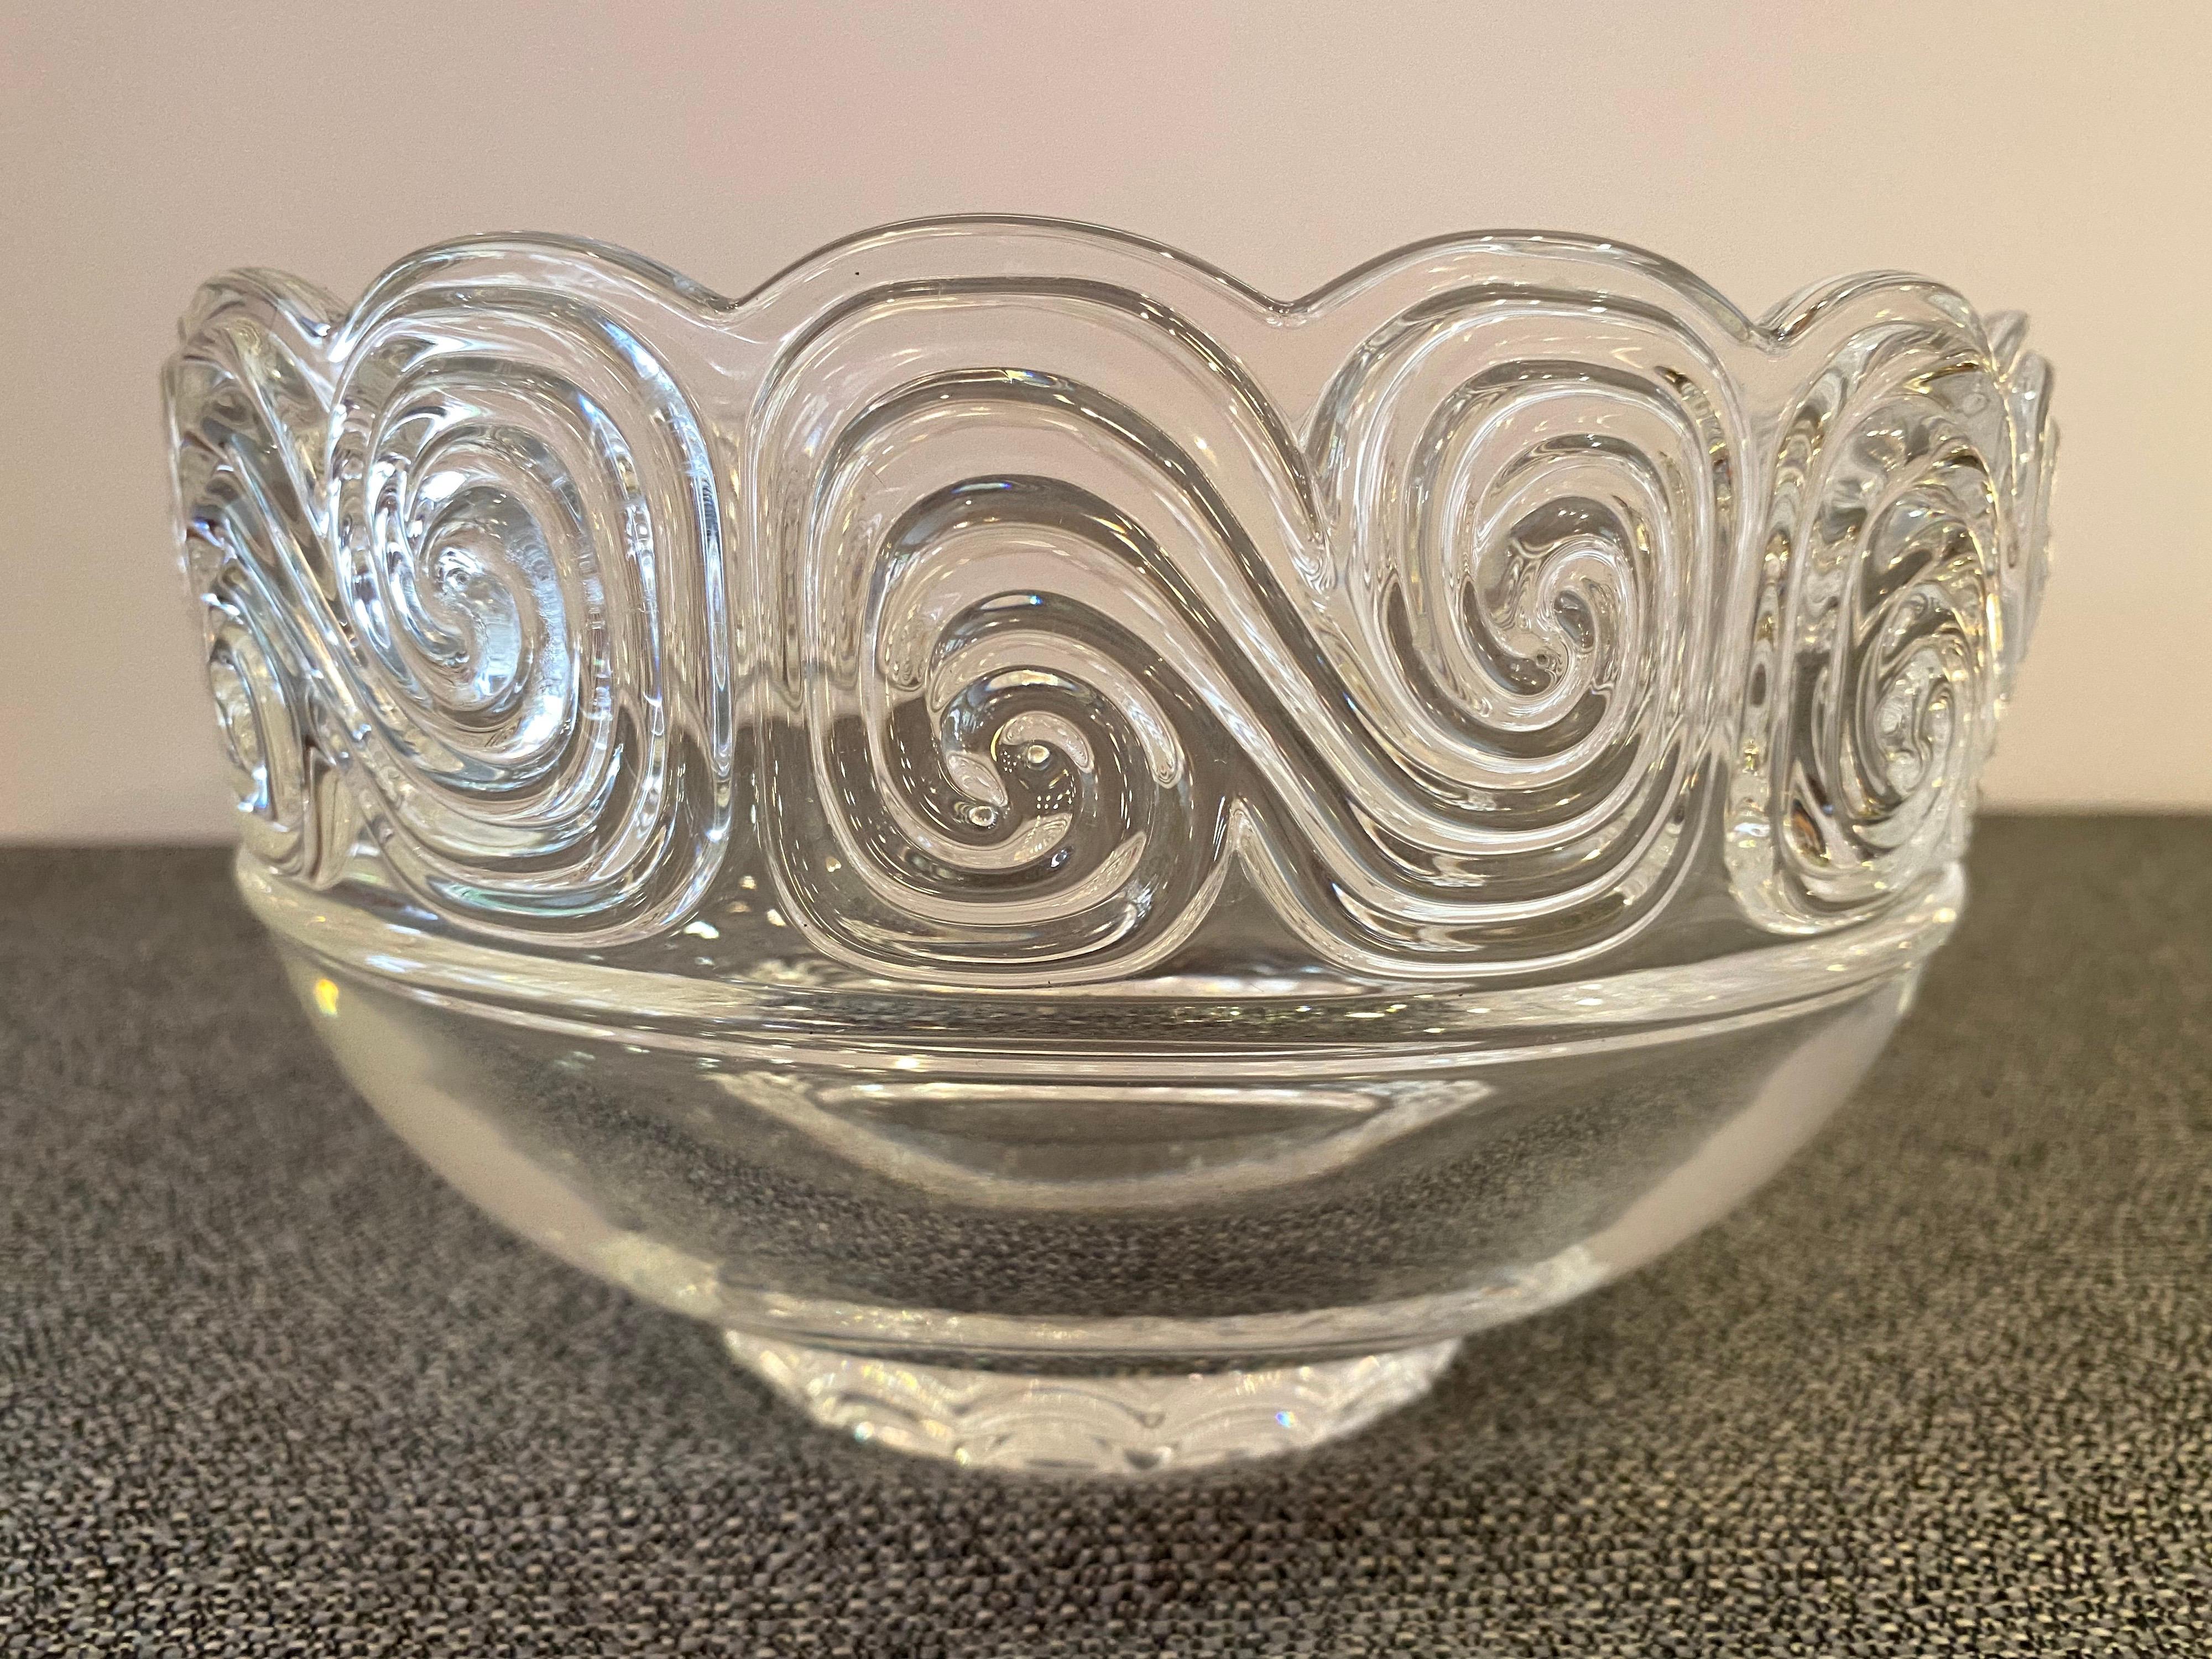 Tiffany glass center bowl. Very nice scale and size. Signed bottom, repeating overlapping 